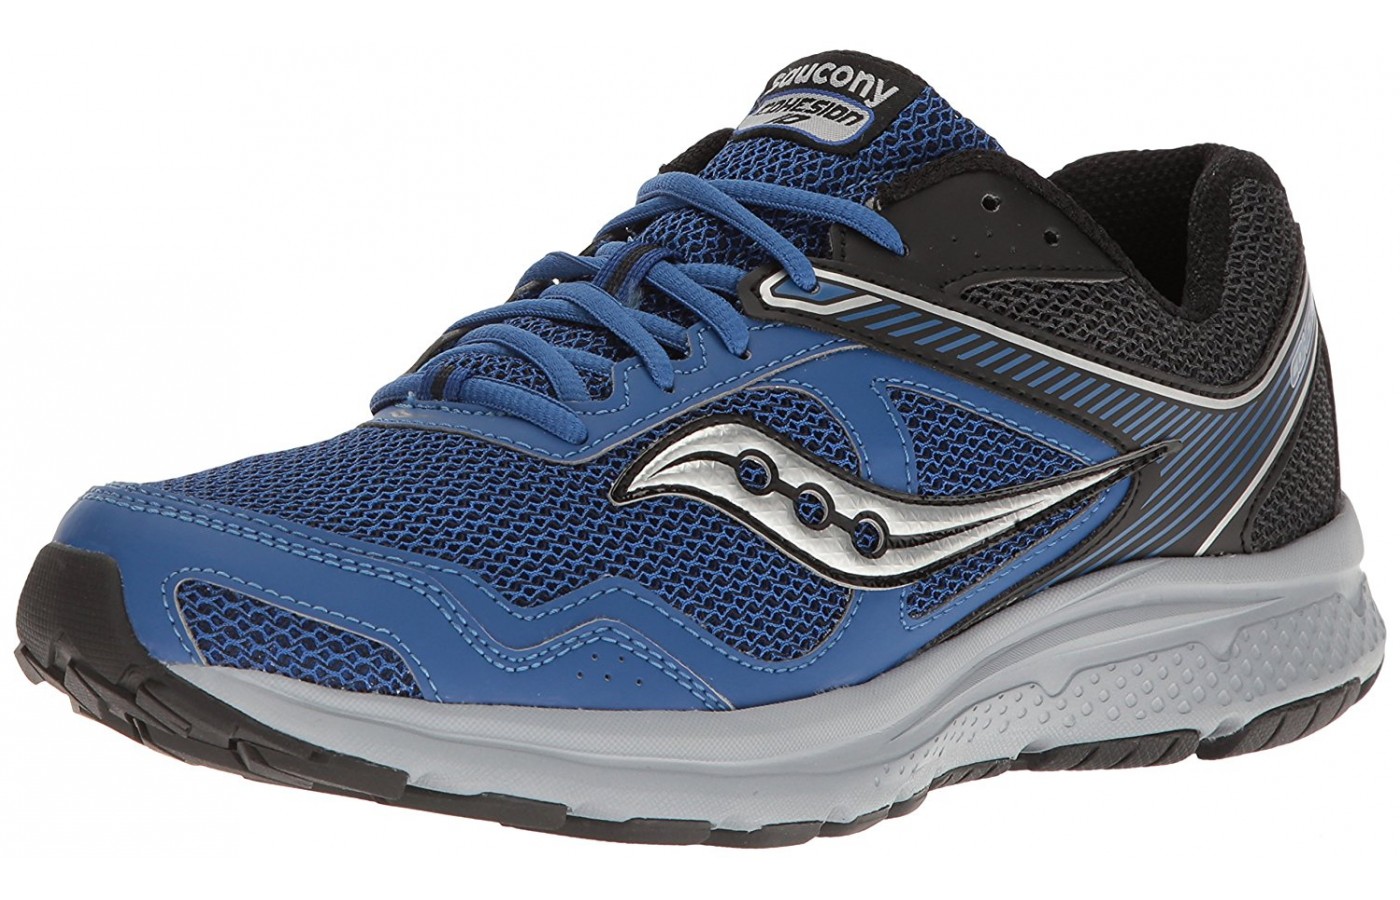 New Mens Saucony Grid Cohesion 10 Running Shoe Style S25333-8 Slvr/Blue W127 pr 